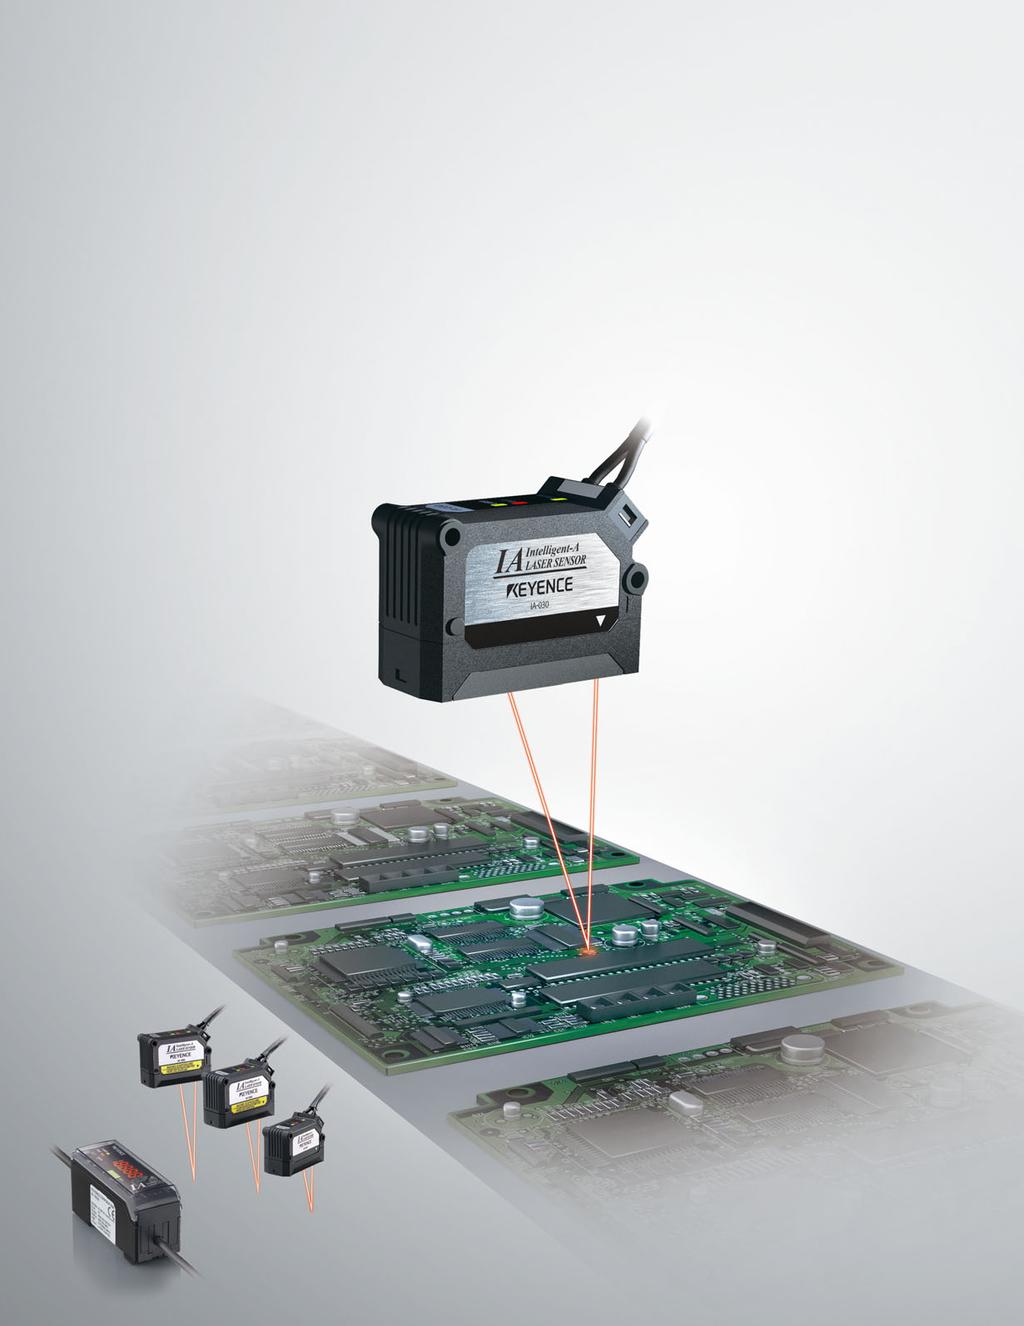 NEW CMOS Analog Laser Sensor IA Series Excellent Cost-Performance High-Accuracy